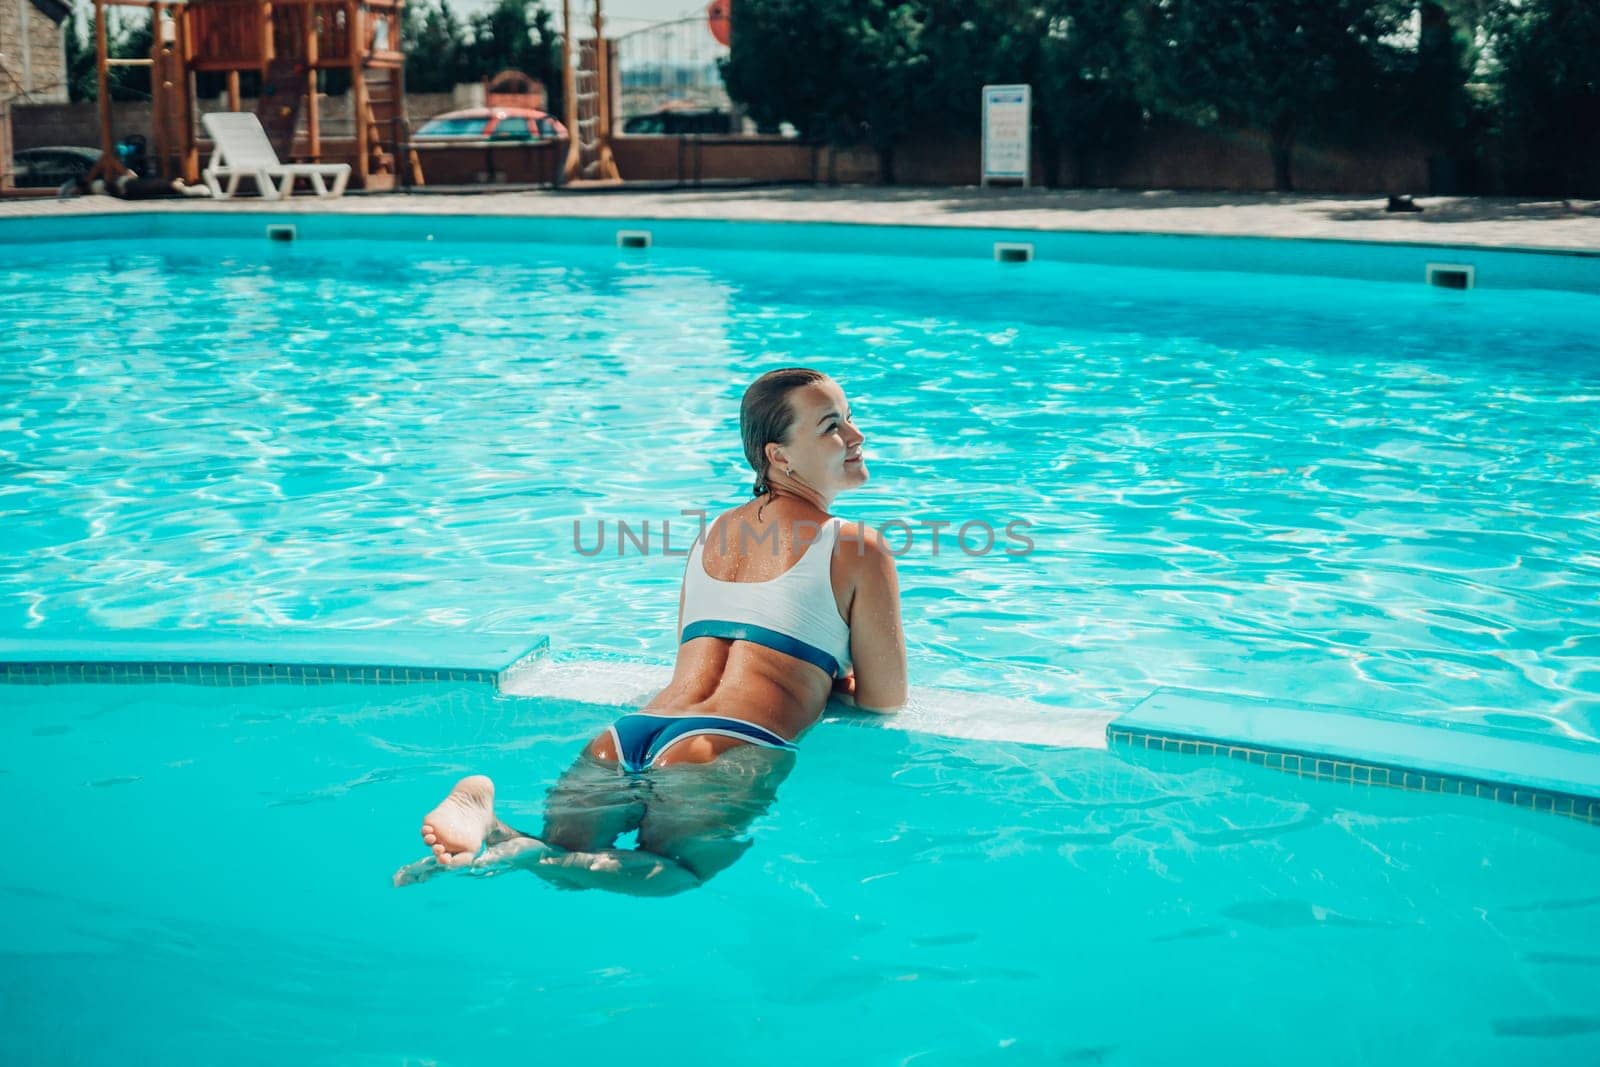 woman swimming pool. happy woman with wet hair and stylish sunglasses sunbathing in pool.